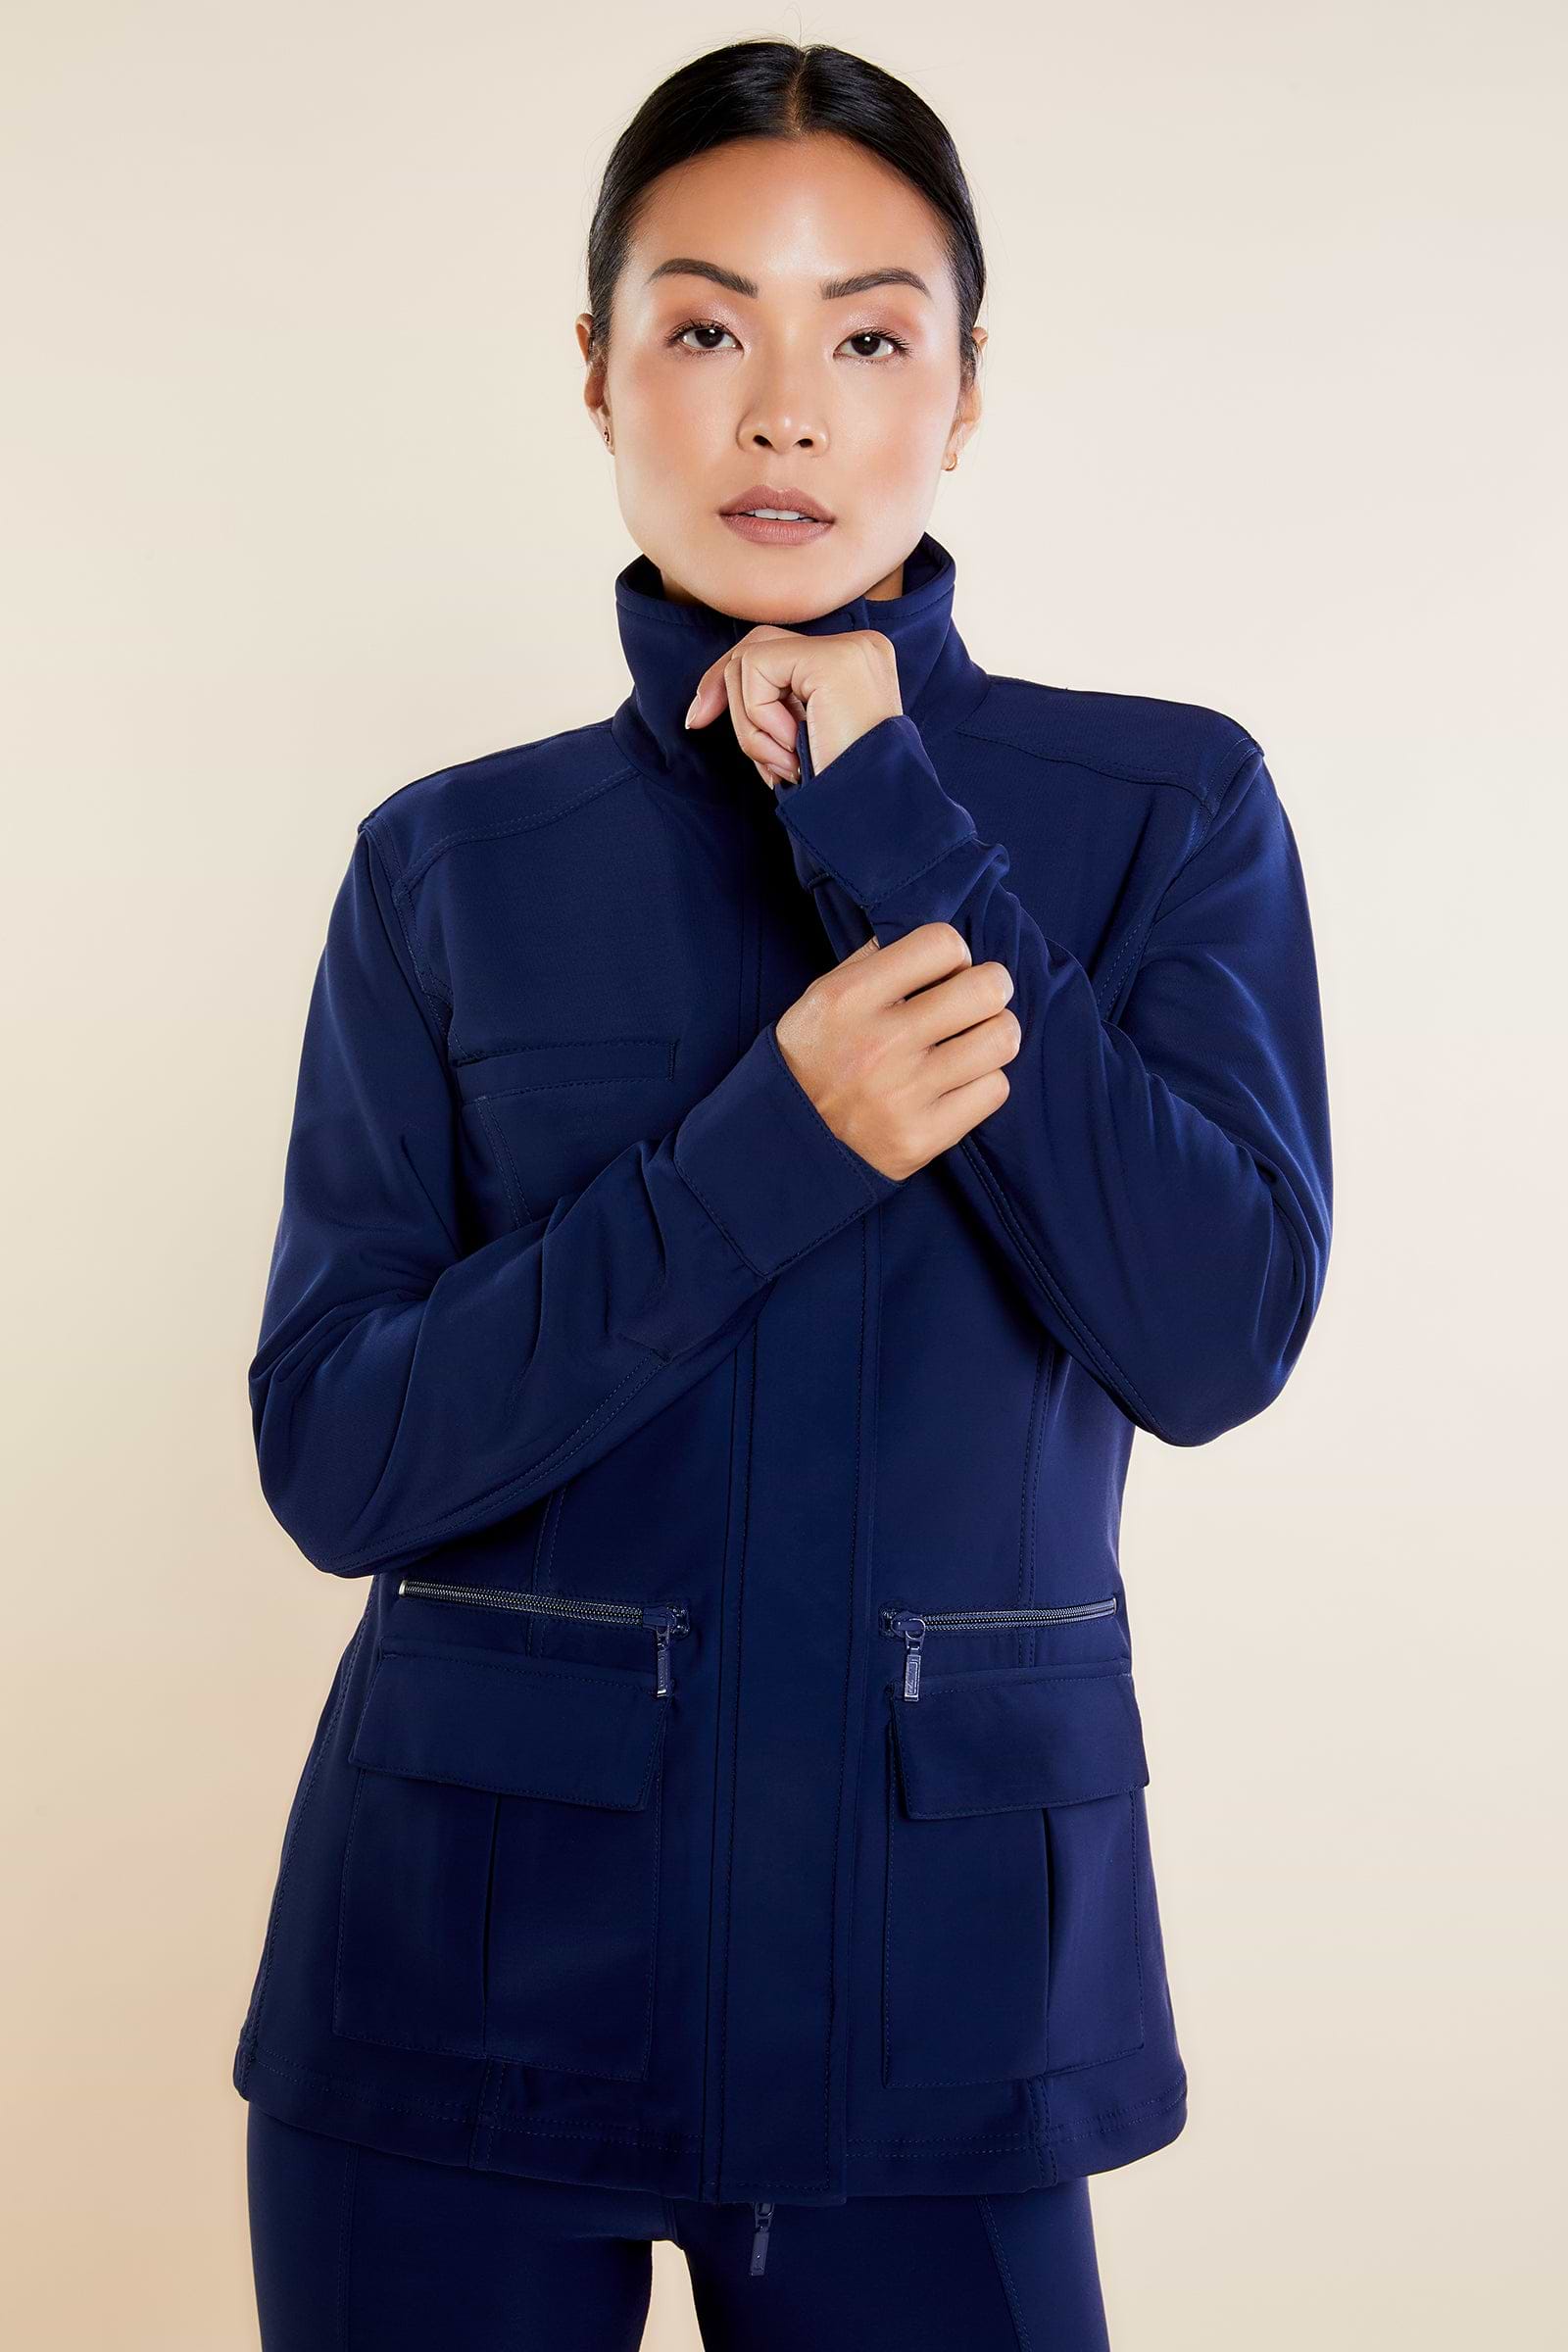 The Best Travel Fleece-Lined Jacket. Woman Showing the Front Profile of a Kenya Cozy Fleece-Lined Jacket in Navy